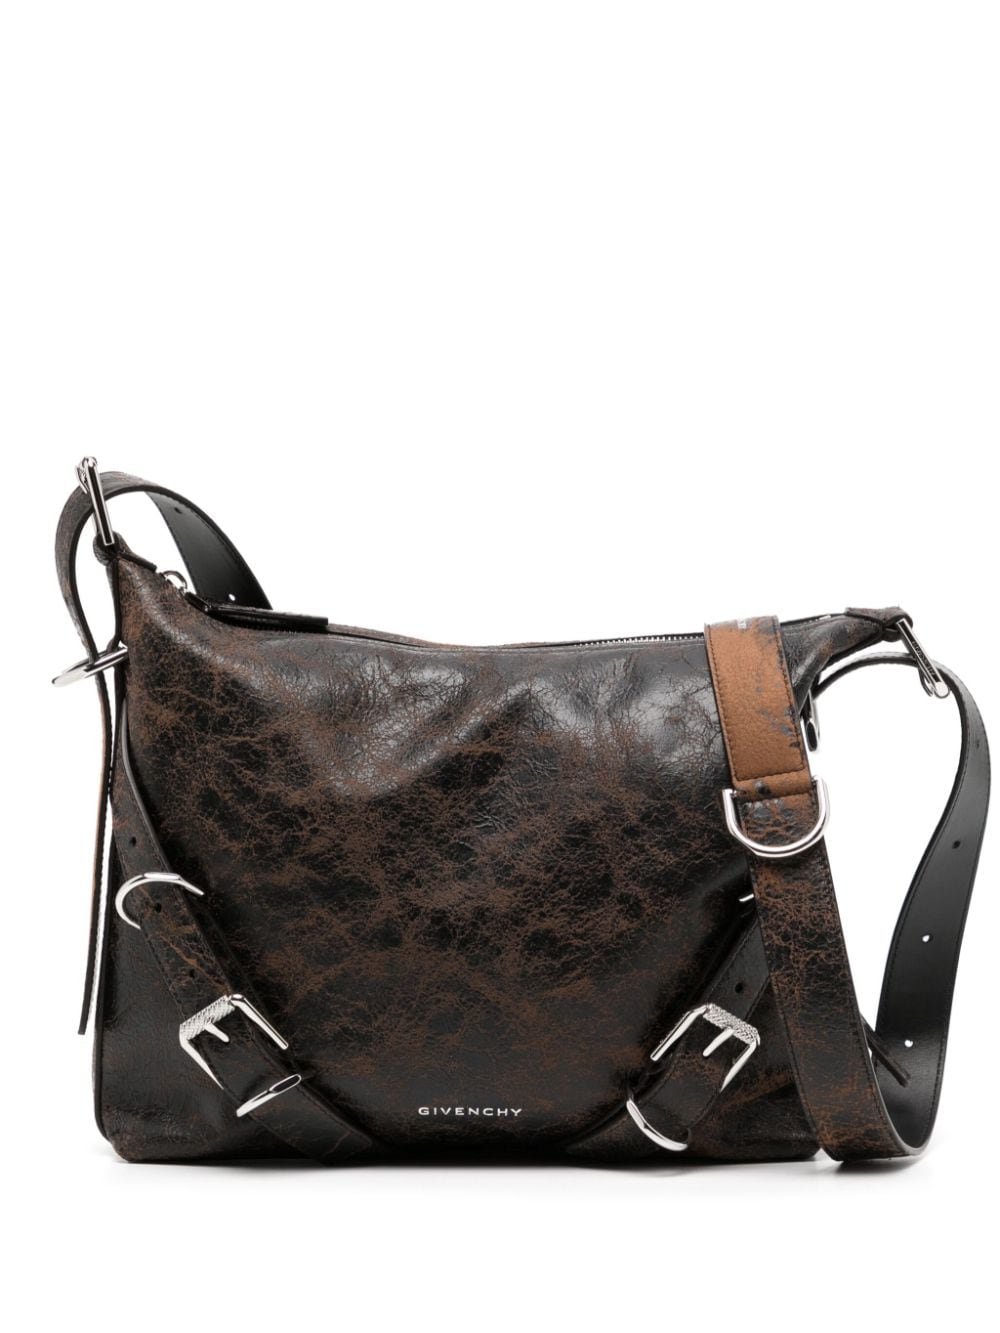 Givenchy Voyou Leather Messenger Bag In Brown